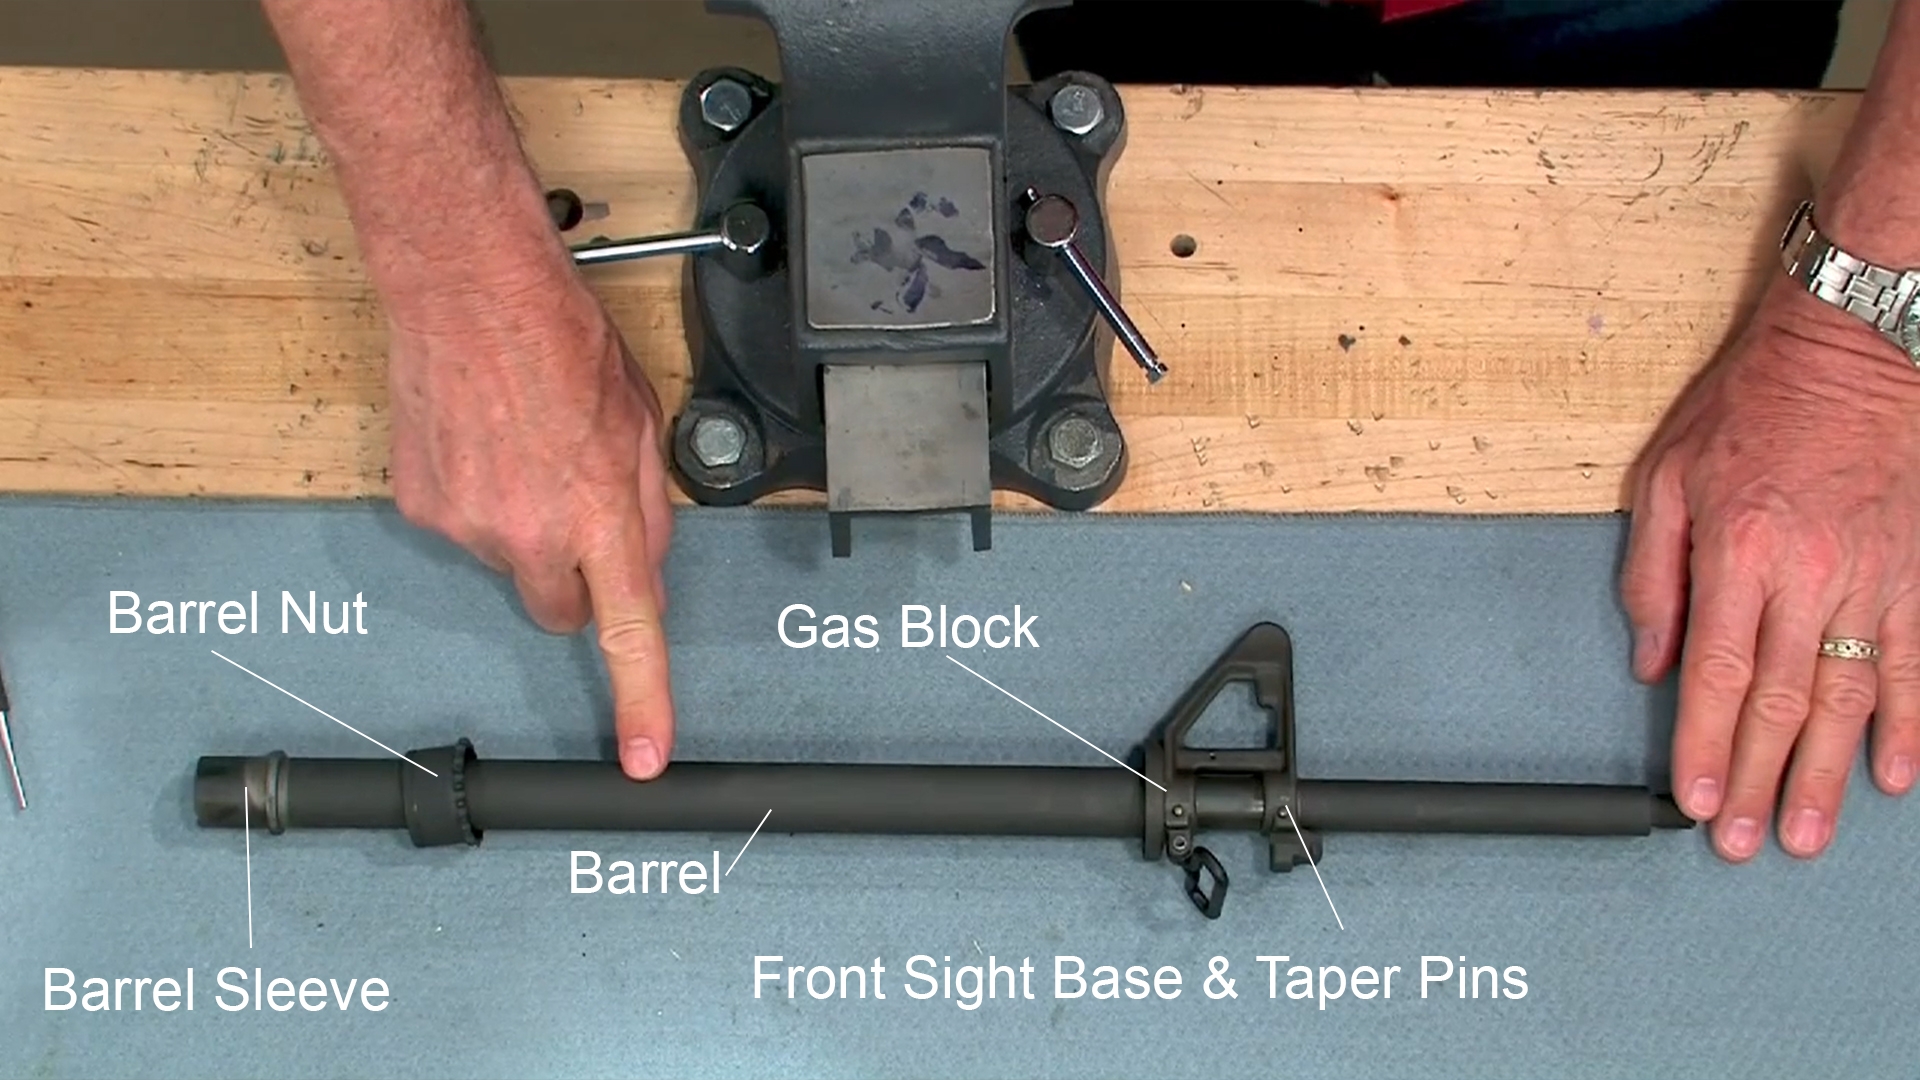 Image relating to How to Assemble an AR-15 Delta Ring